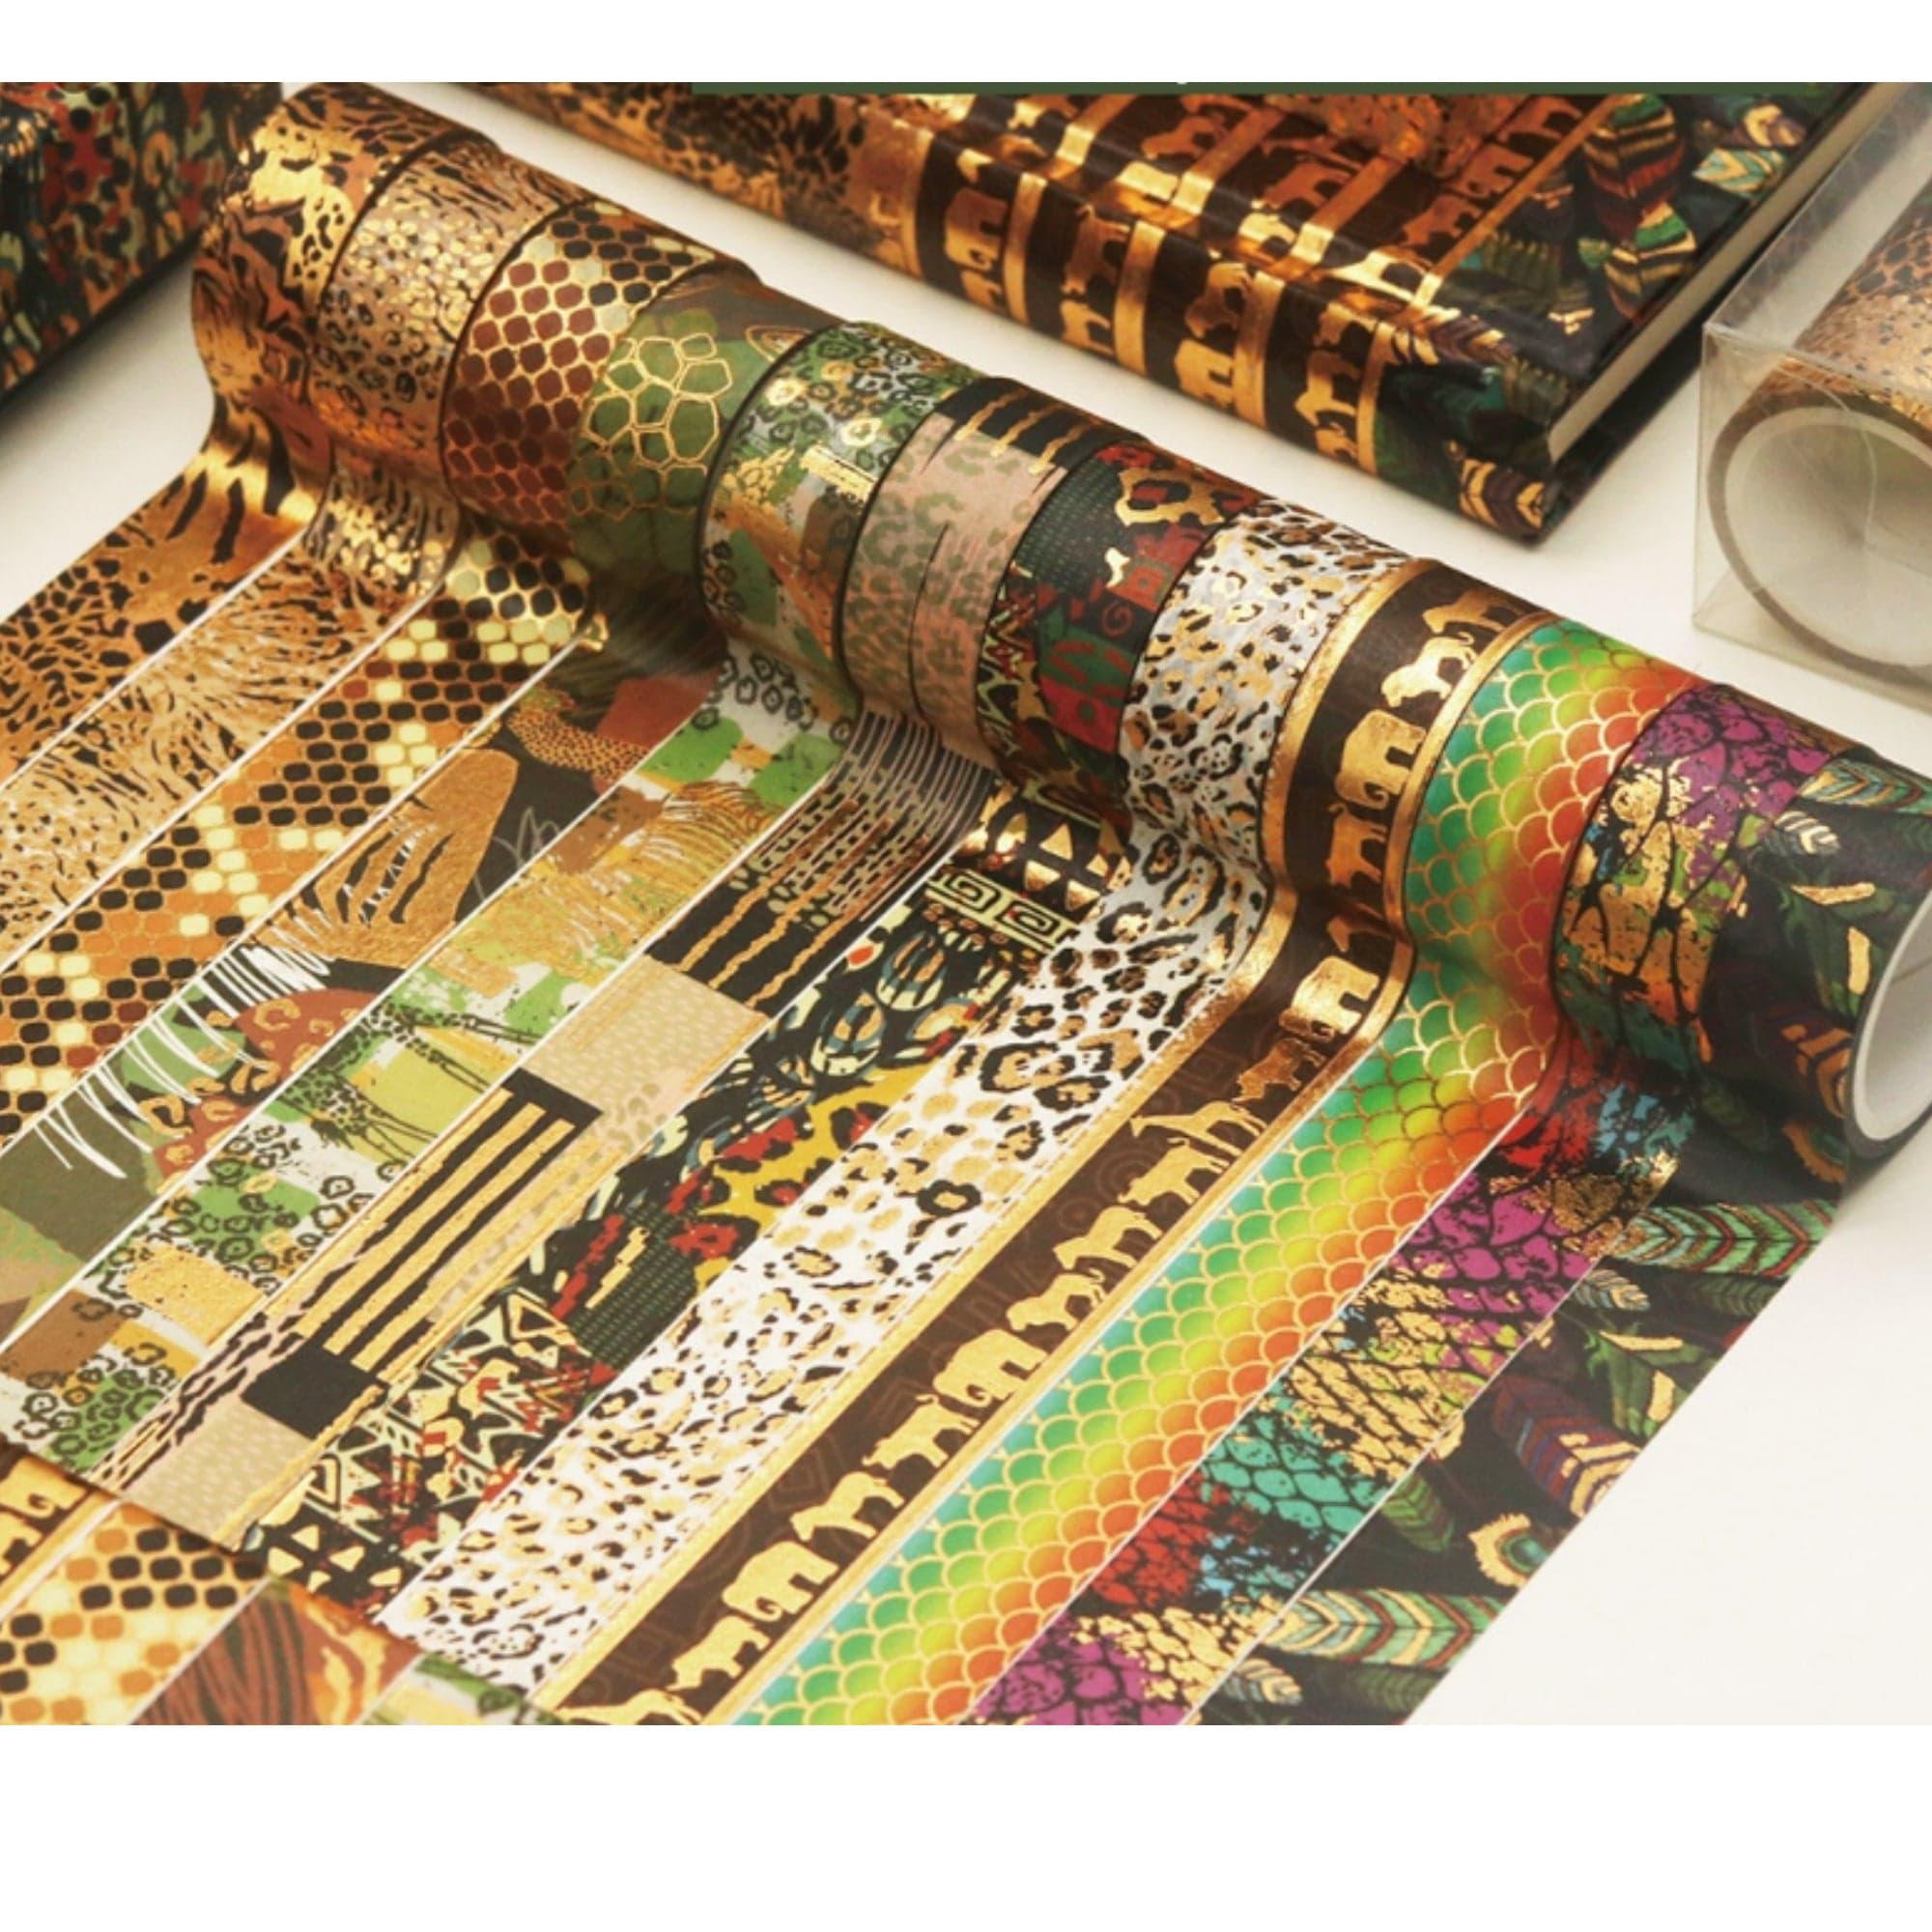 TW Collection Animal Print Gold Foil Washi Tape by SSC Designs - 12 Rolls (15mm x 9 Feet each)